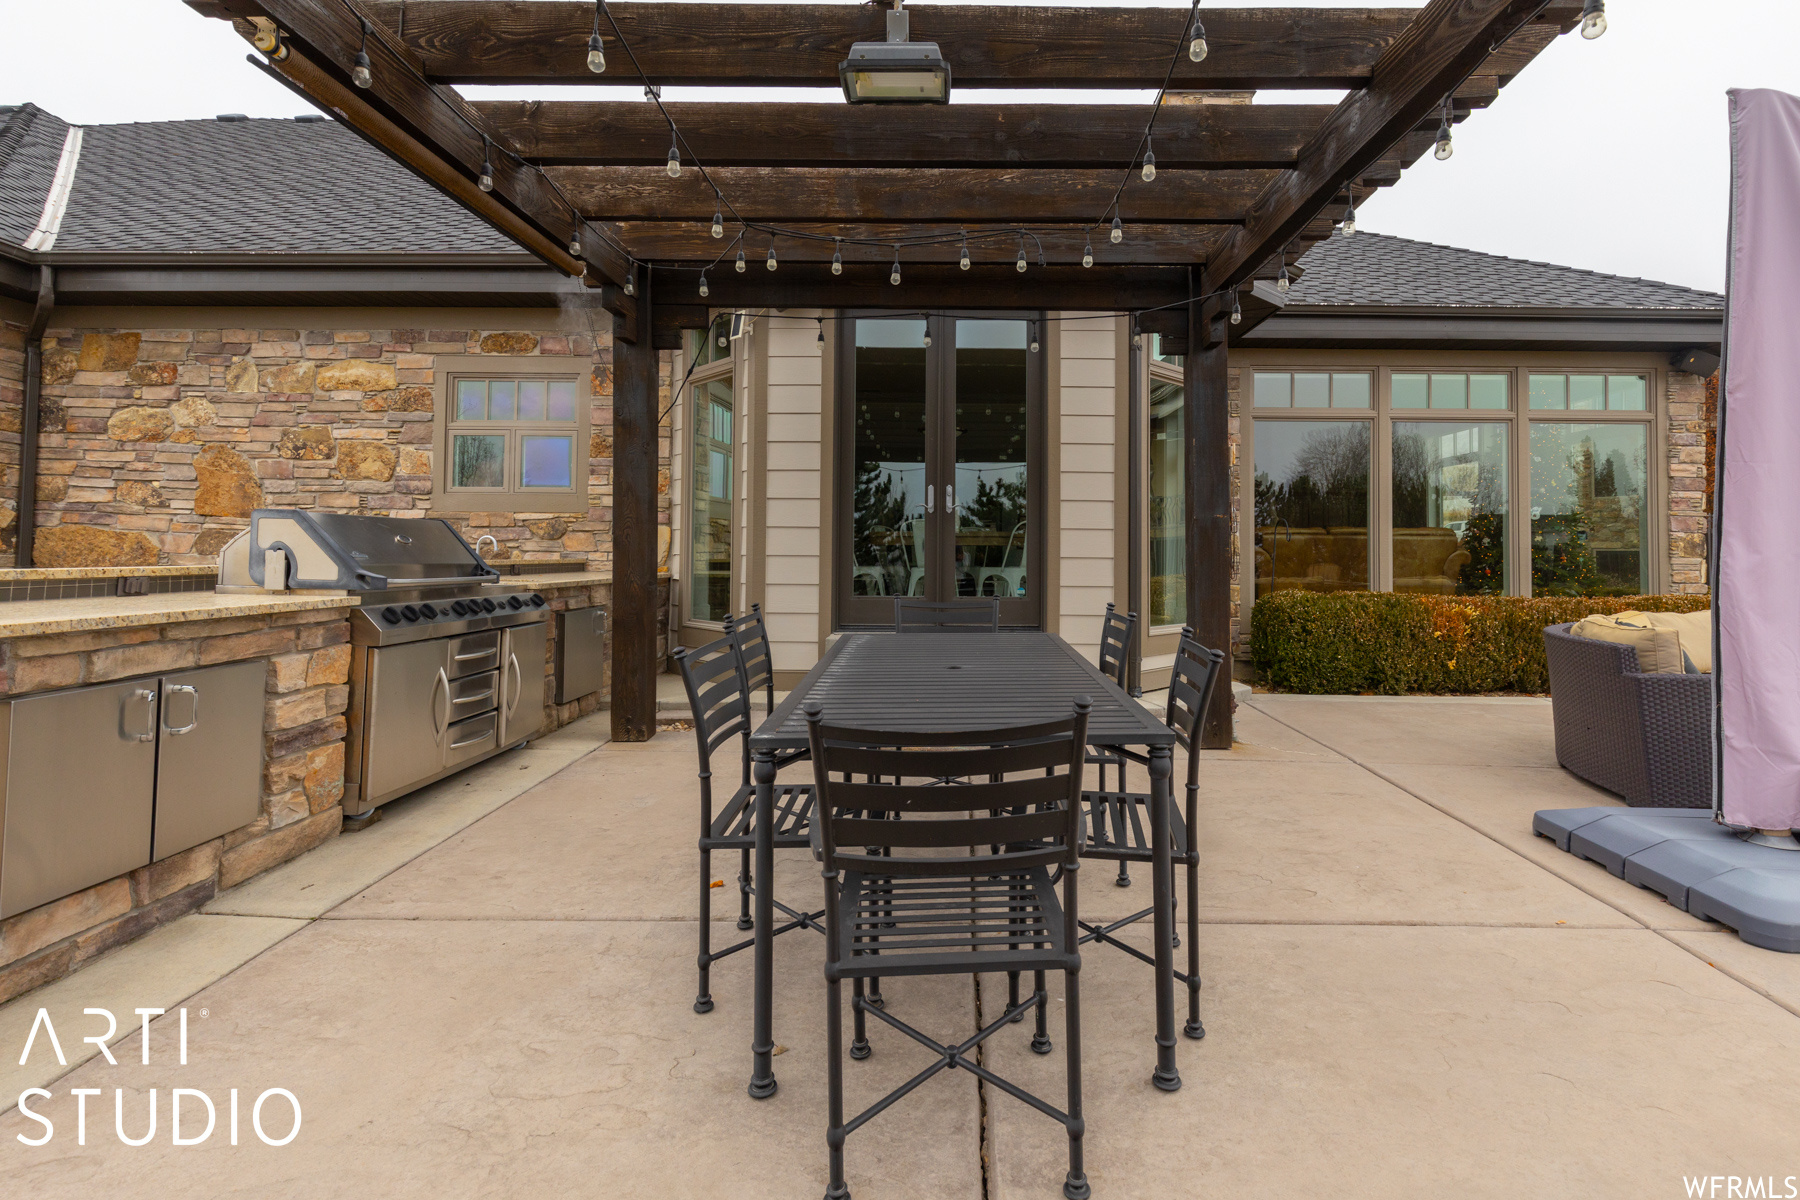 View of terrace featuring a pergola, exterior kitchen, and area for grilling